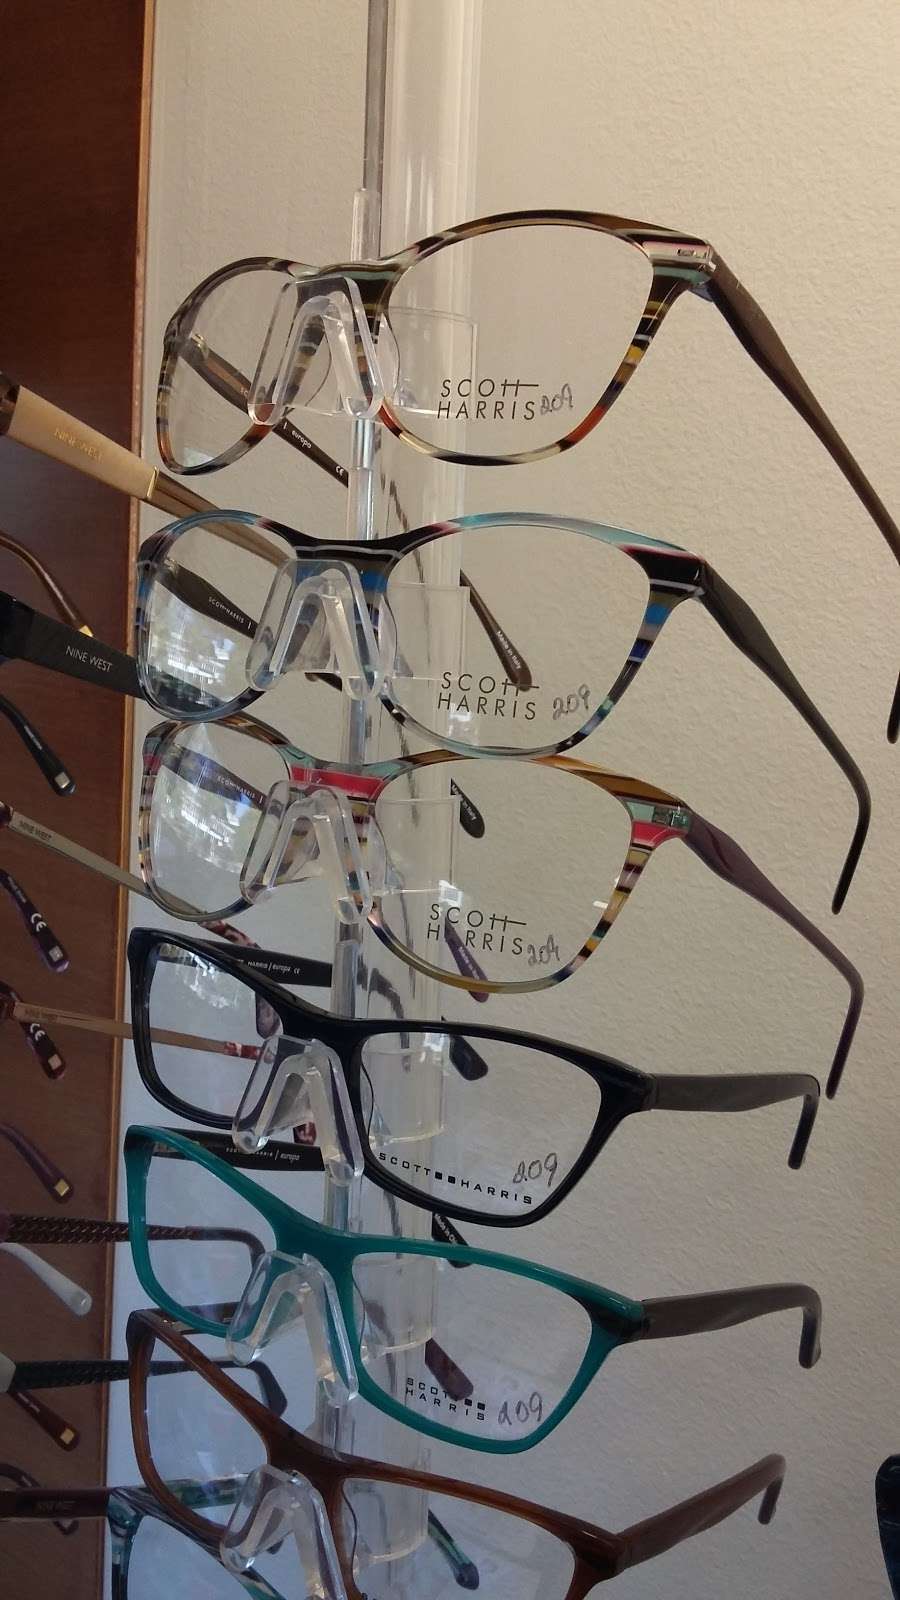 Bowers & Snyder Opticians | 5817, 6569 N Charles St # 305, Towson, MD 21204, USA | Phone: (410) 494-0021